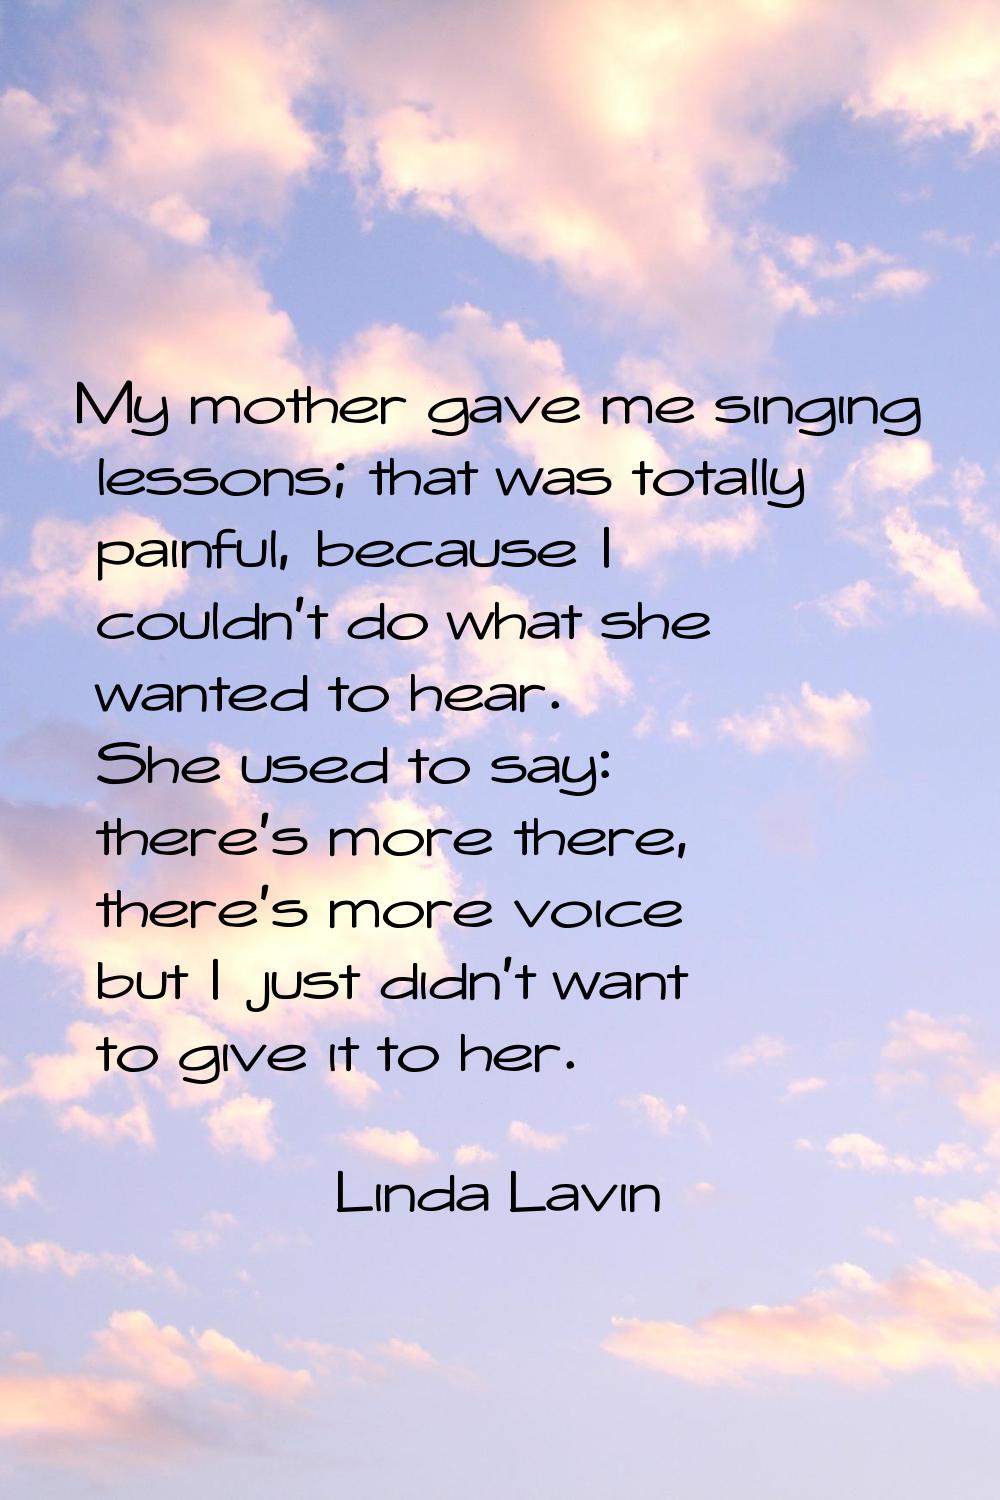 My mother gave me singing lessons; that was totally painful, because I couldn't do what she wanted 